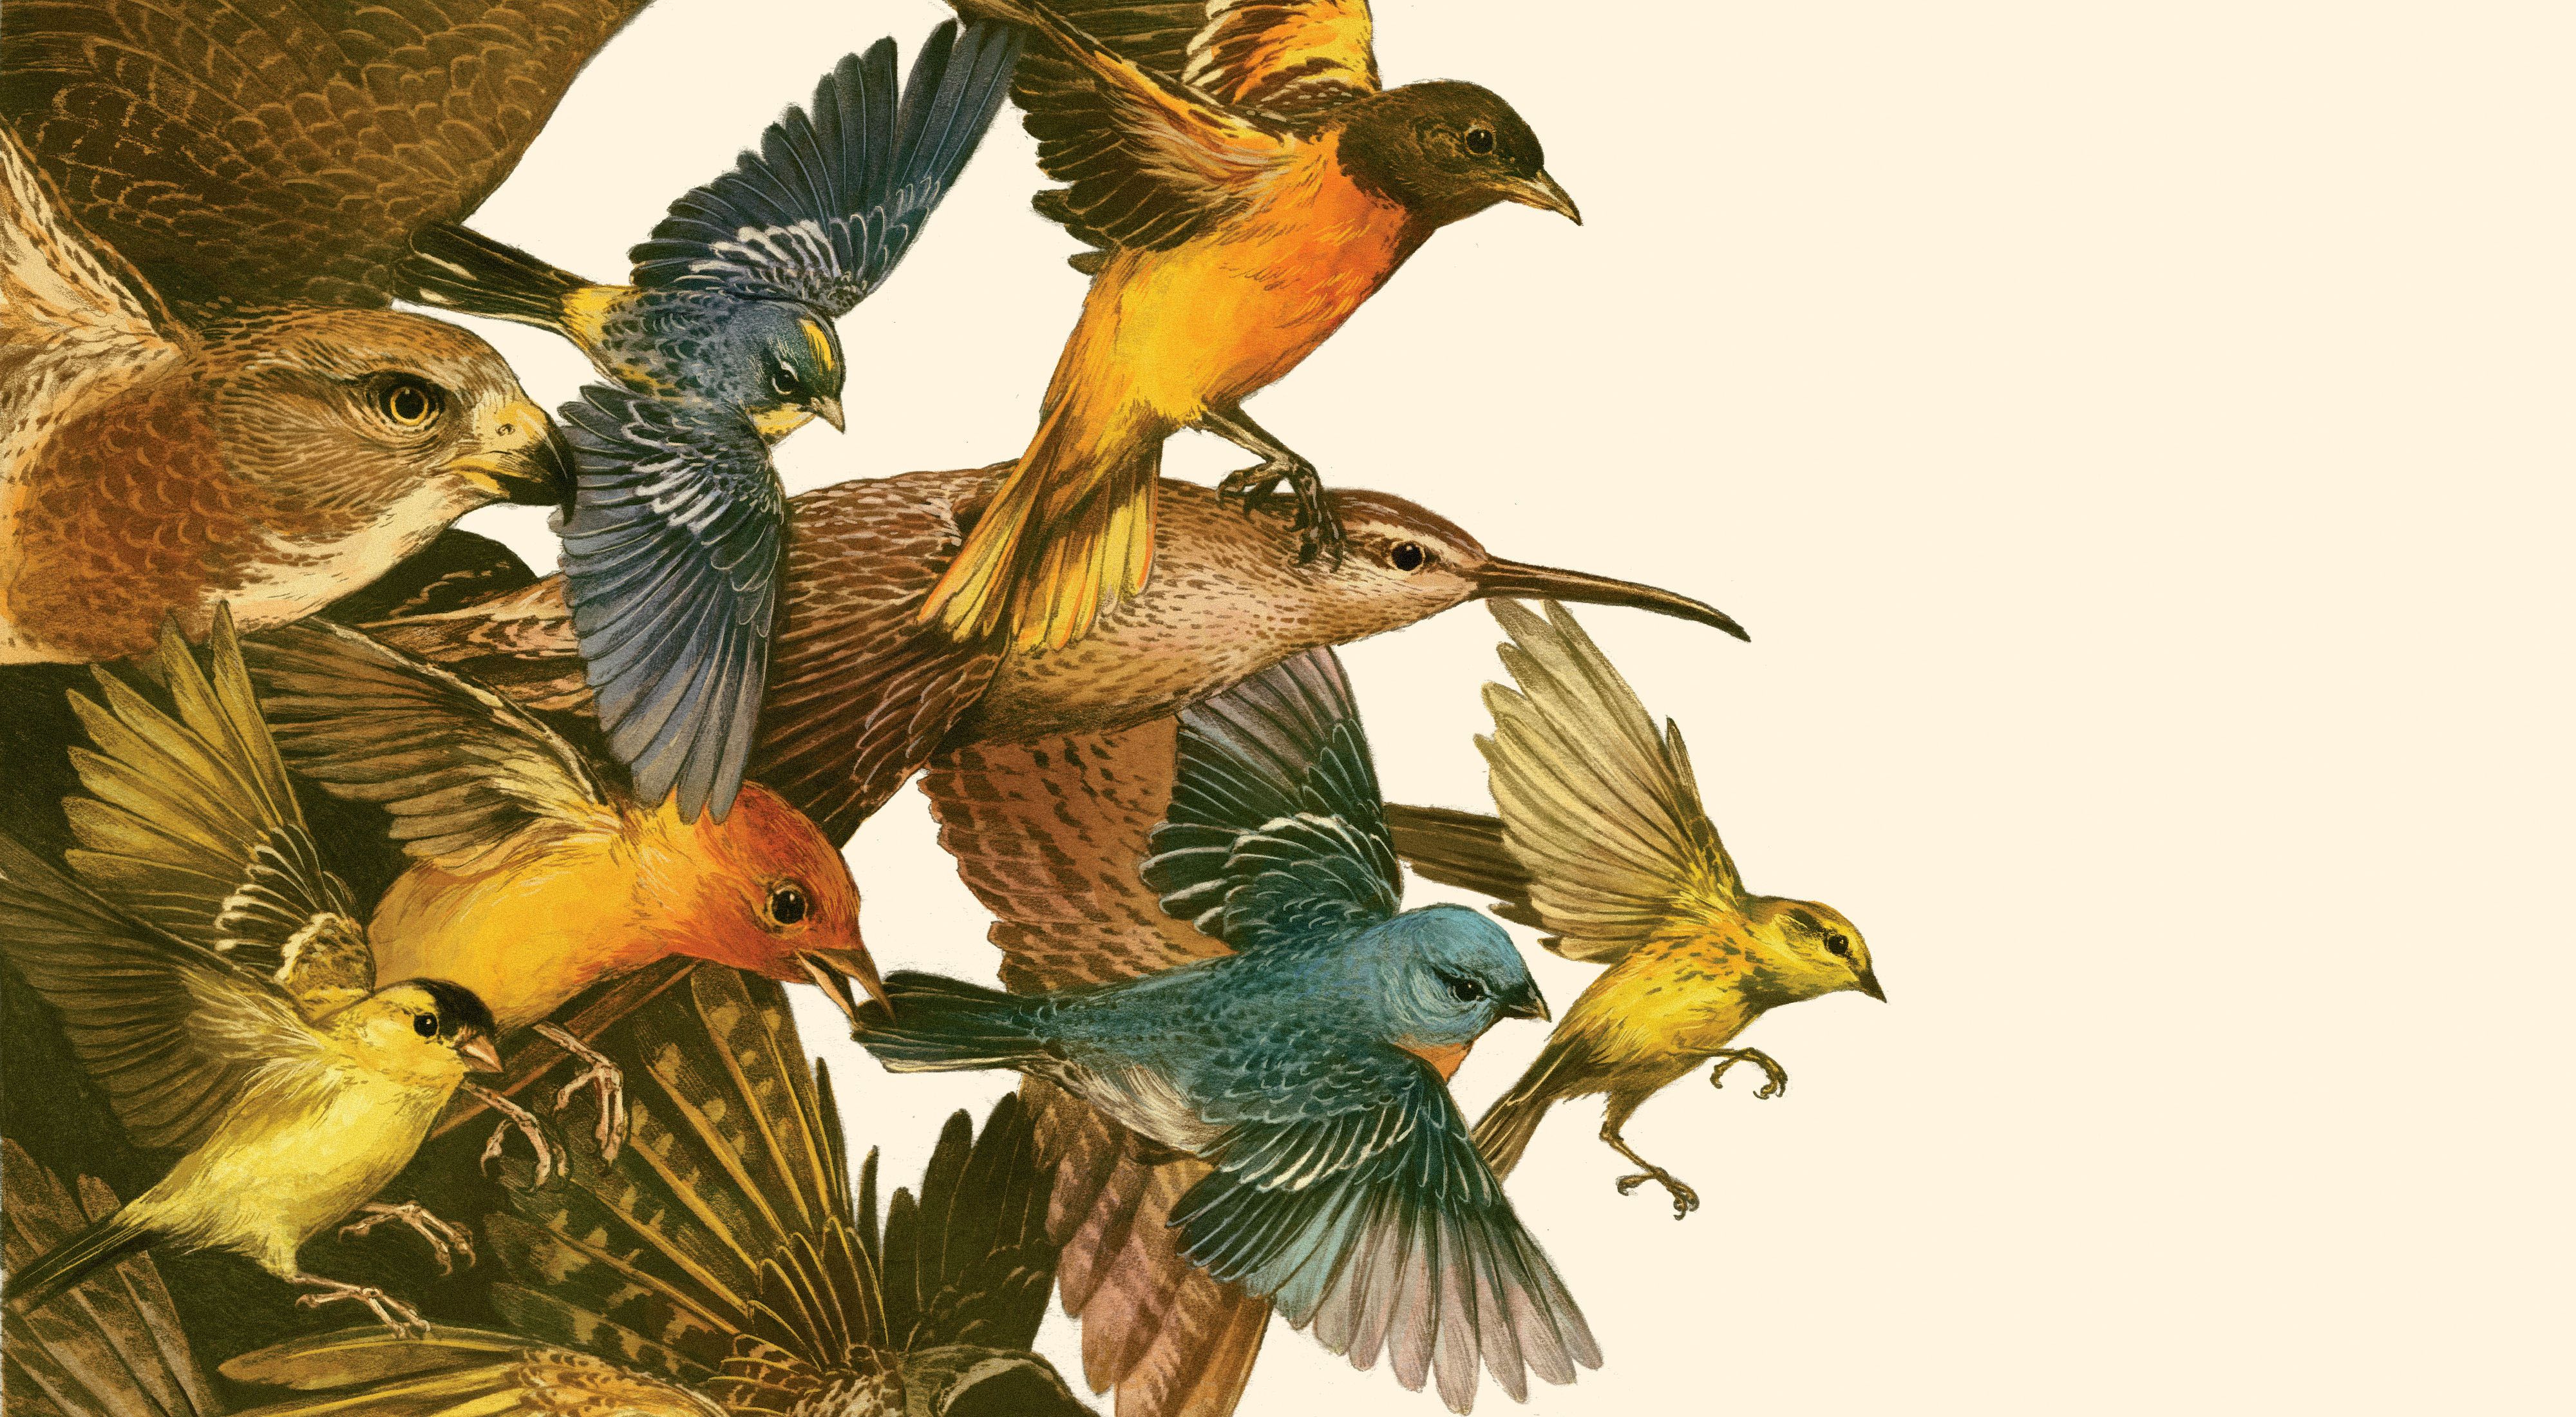 a colorful illustration of multiple species of birds